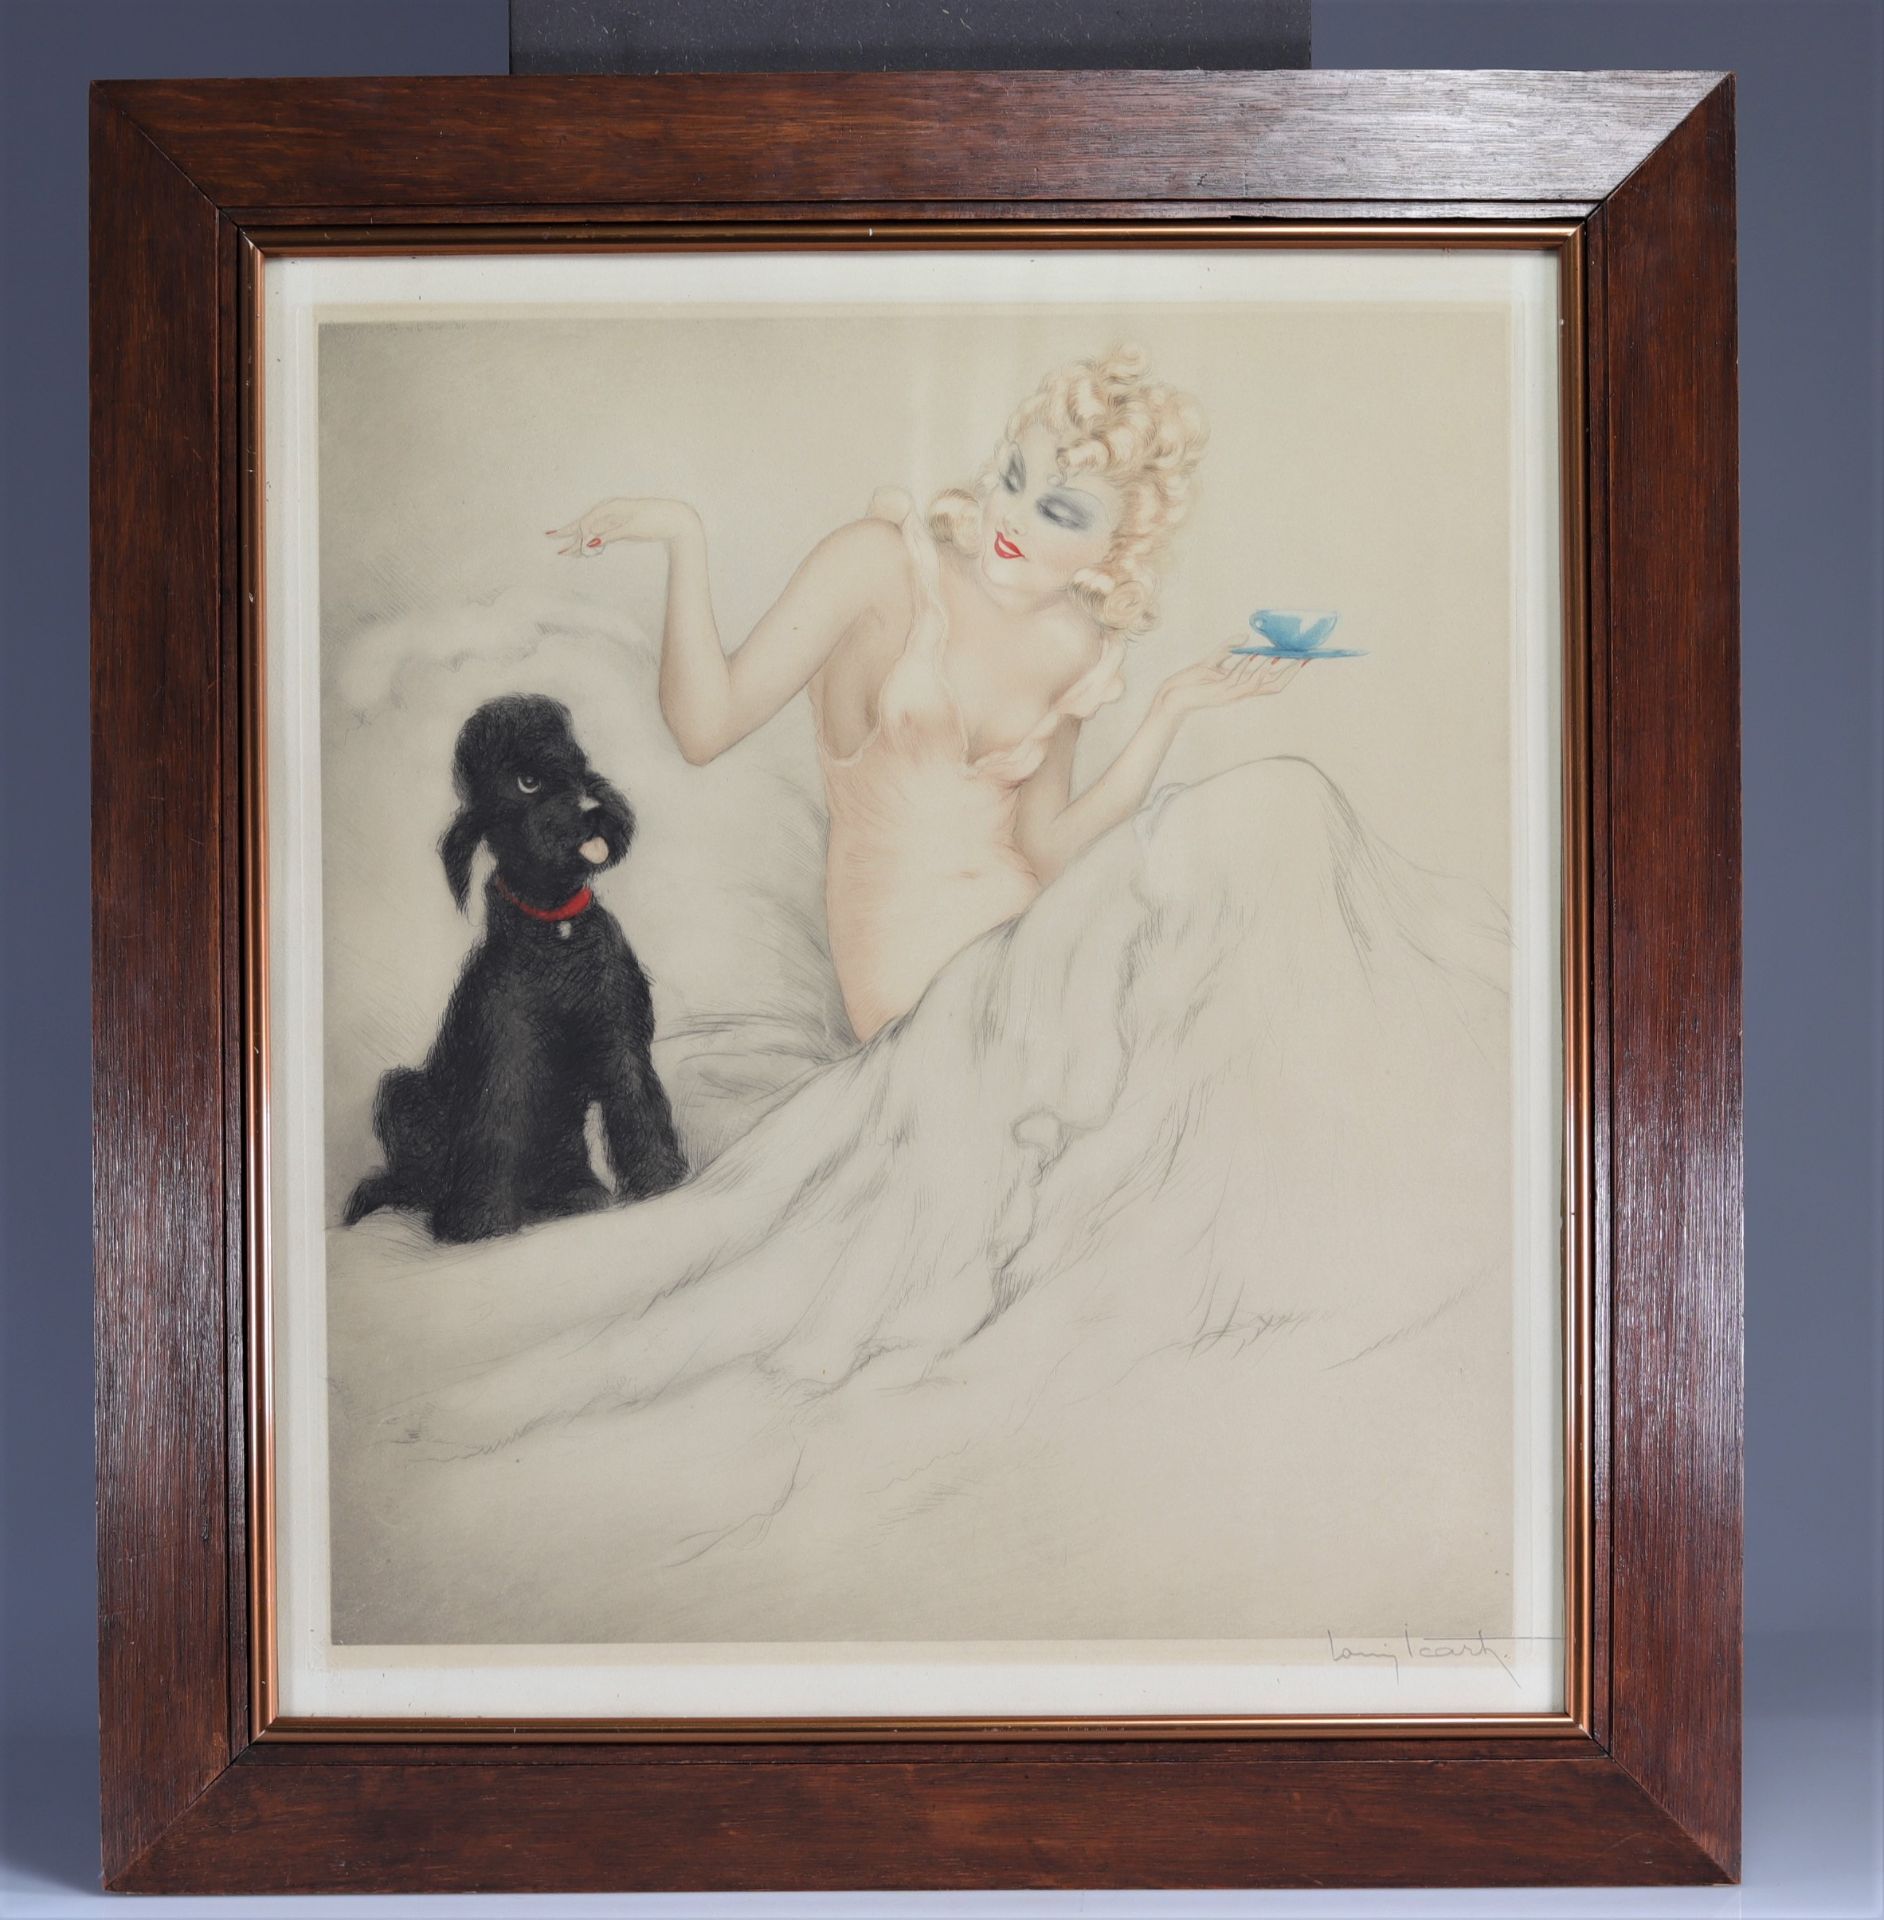 Louis ICART (1888-1950) Etching and aquatint in color "young with a poodle" - Image 2 of 2